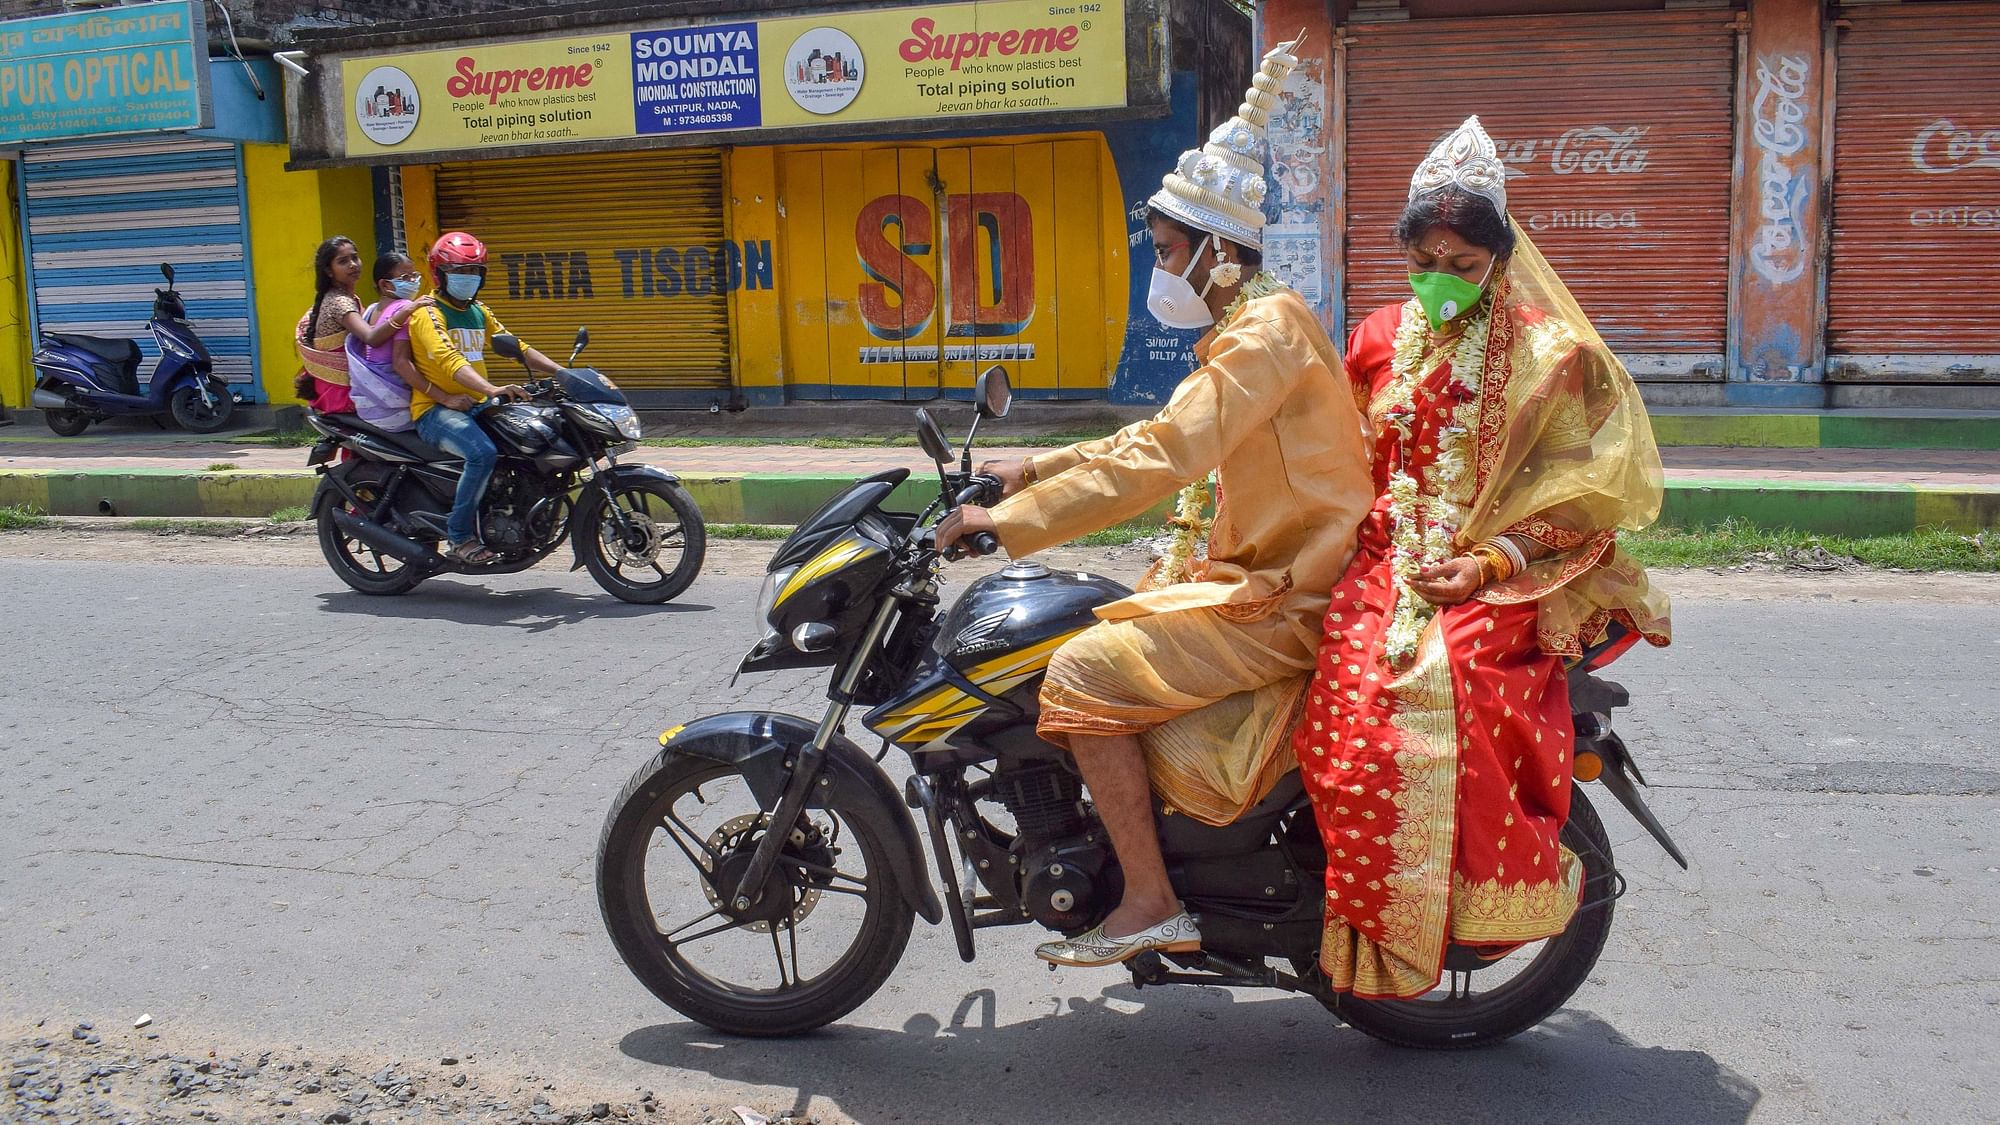 Newly wed couple Soumen Ghosh and Sarmistha ride a motorcycle to return home after their marriage amid COVID-19 pandemic, in Nadia. Image used for representation.